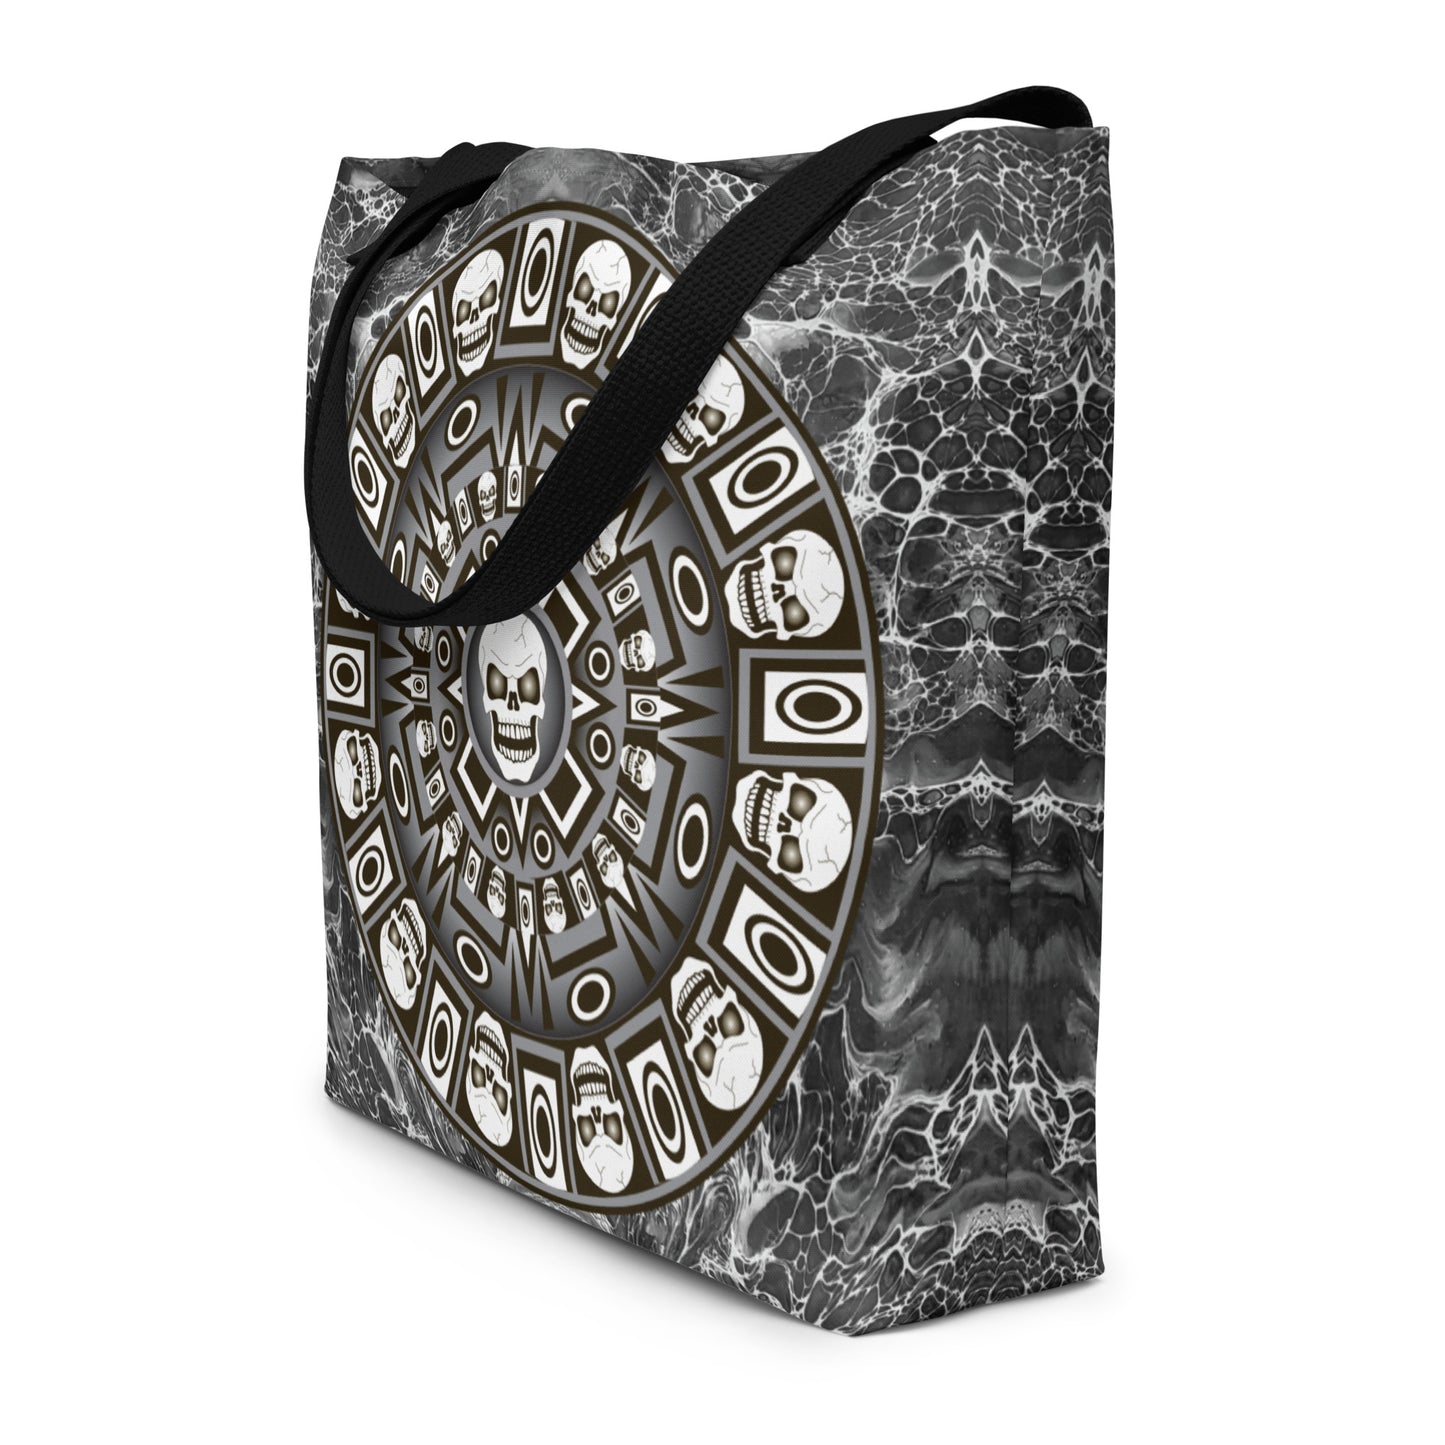 All-Over Print Large Tote Bag - SW-005